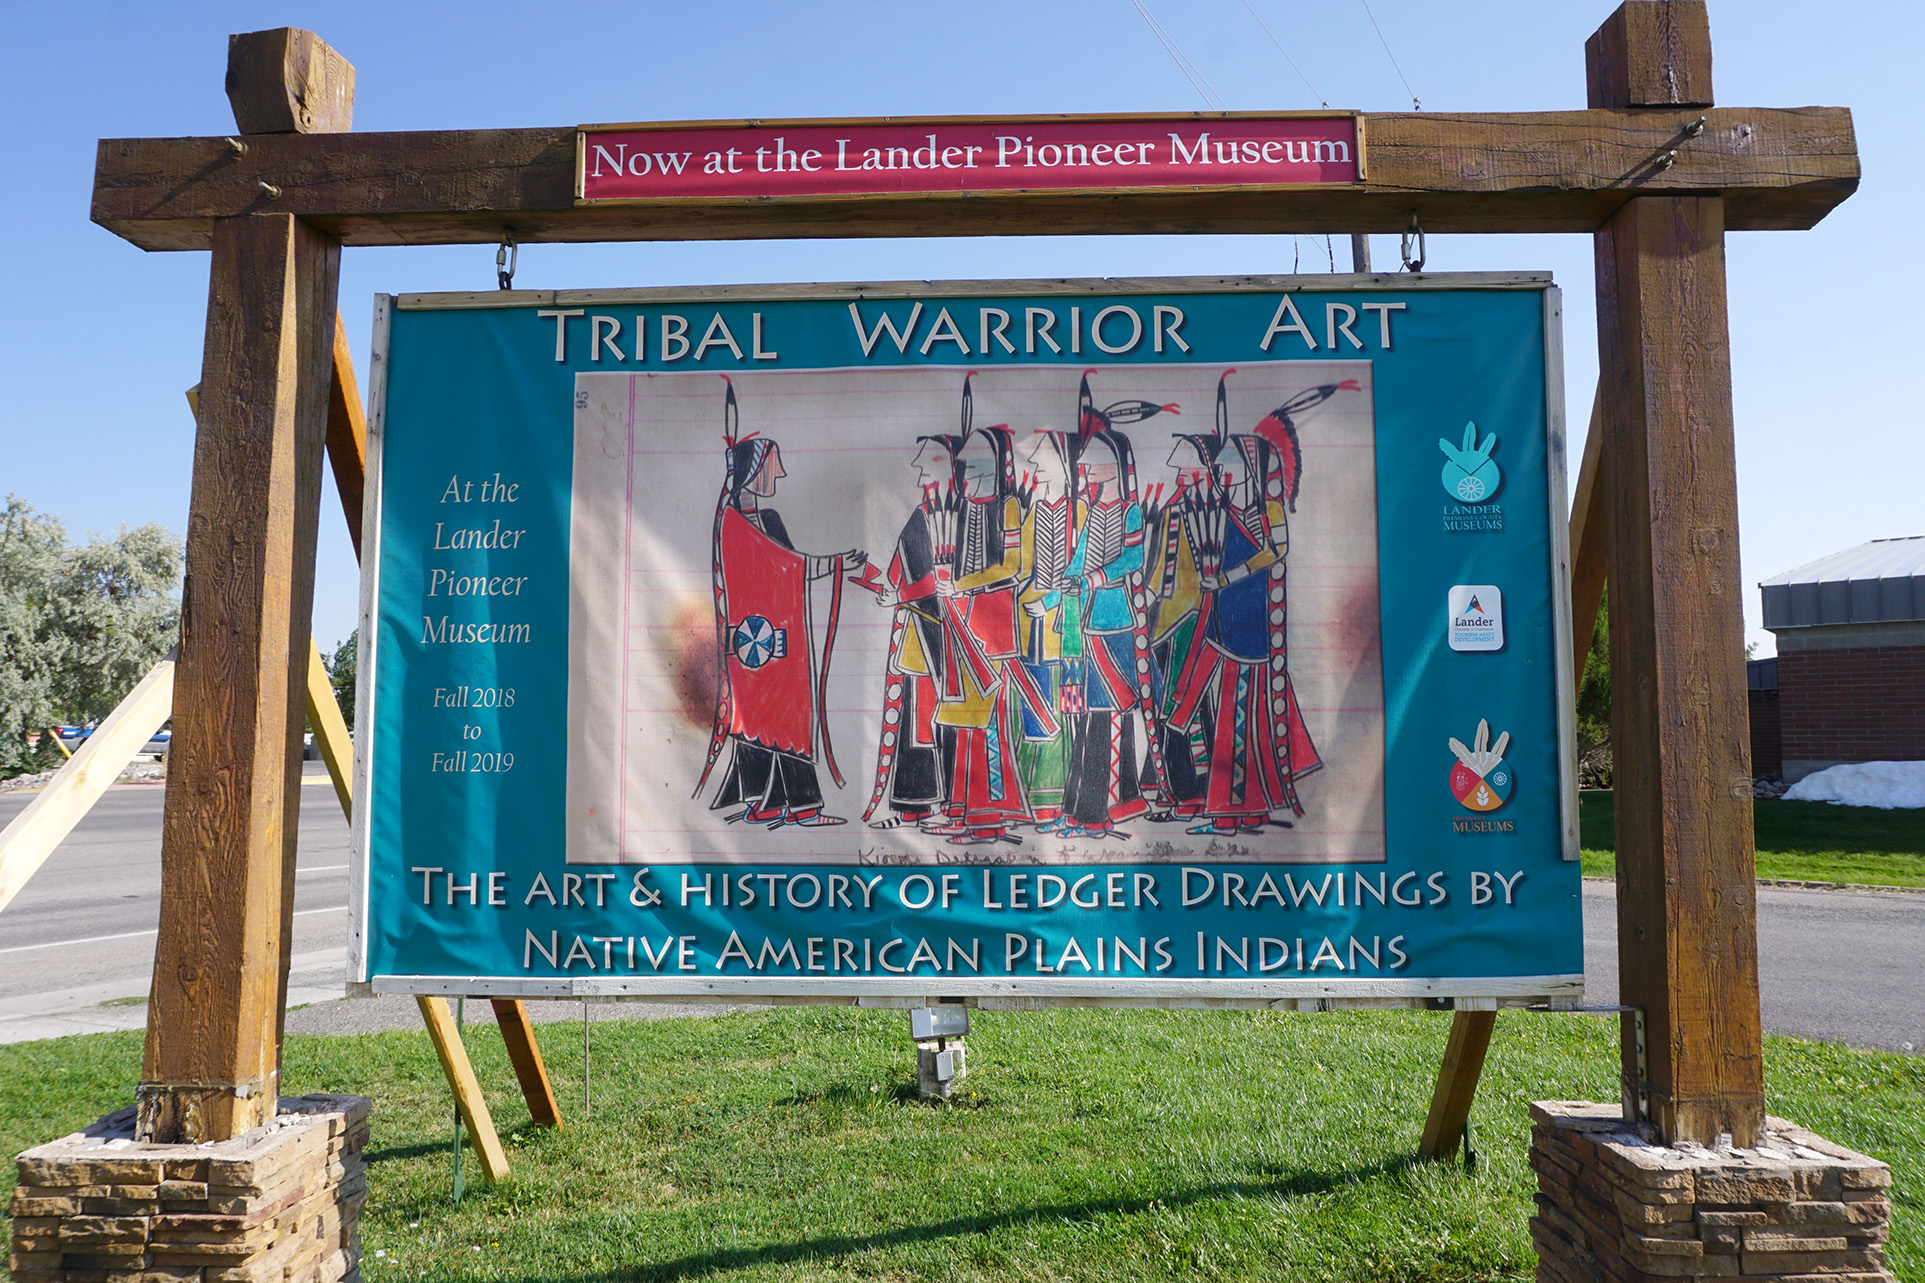 The "Tribal Warrior Art" show has been on display since 2018, and claims to display examples of ledger art-narrative drawings created by Indigenous artists on 19th century account books. 